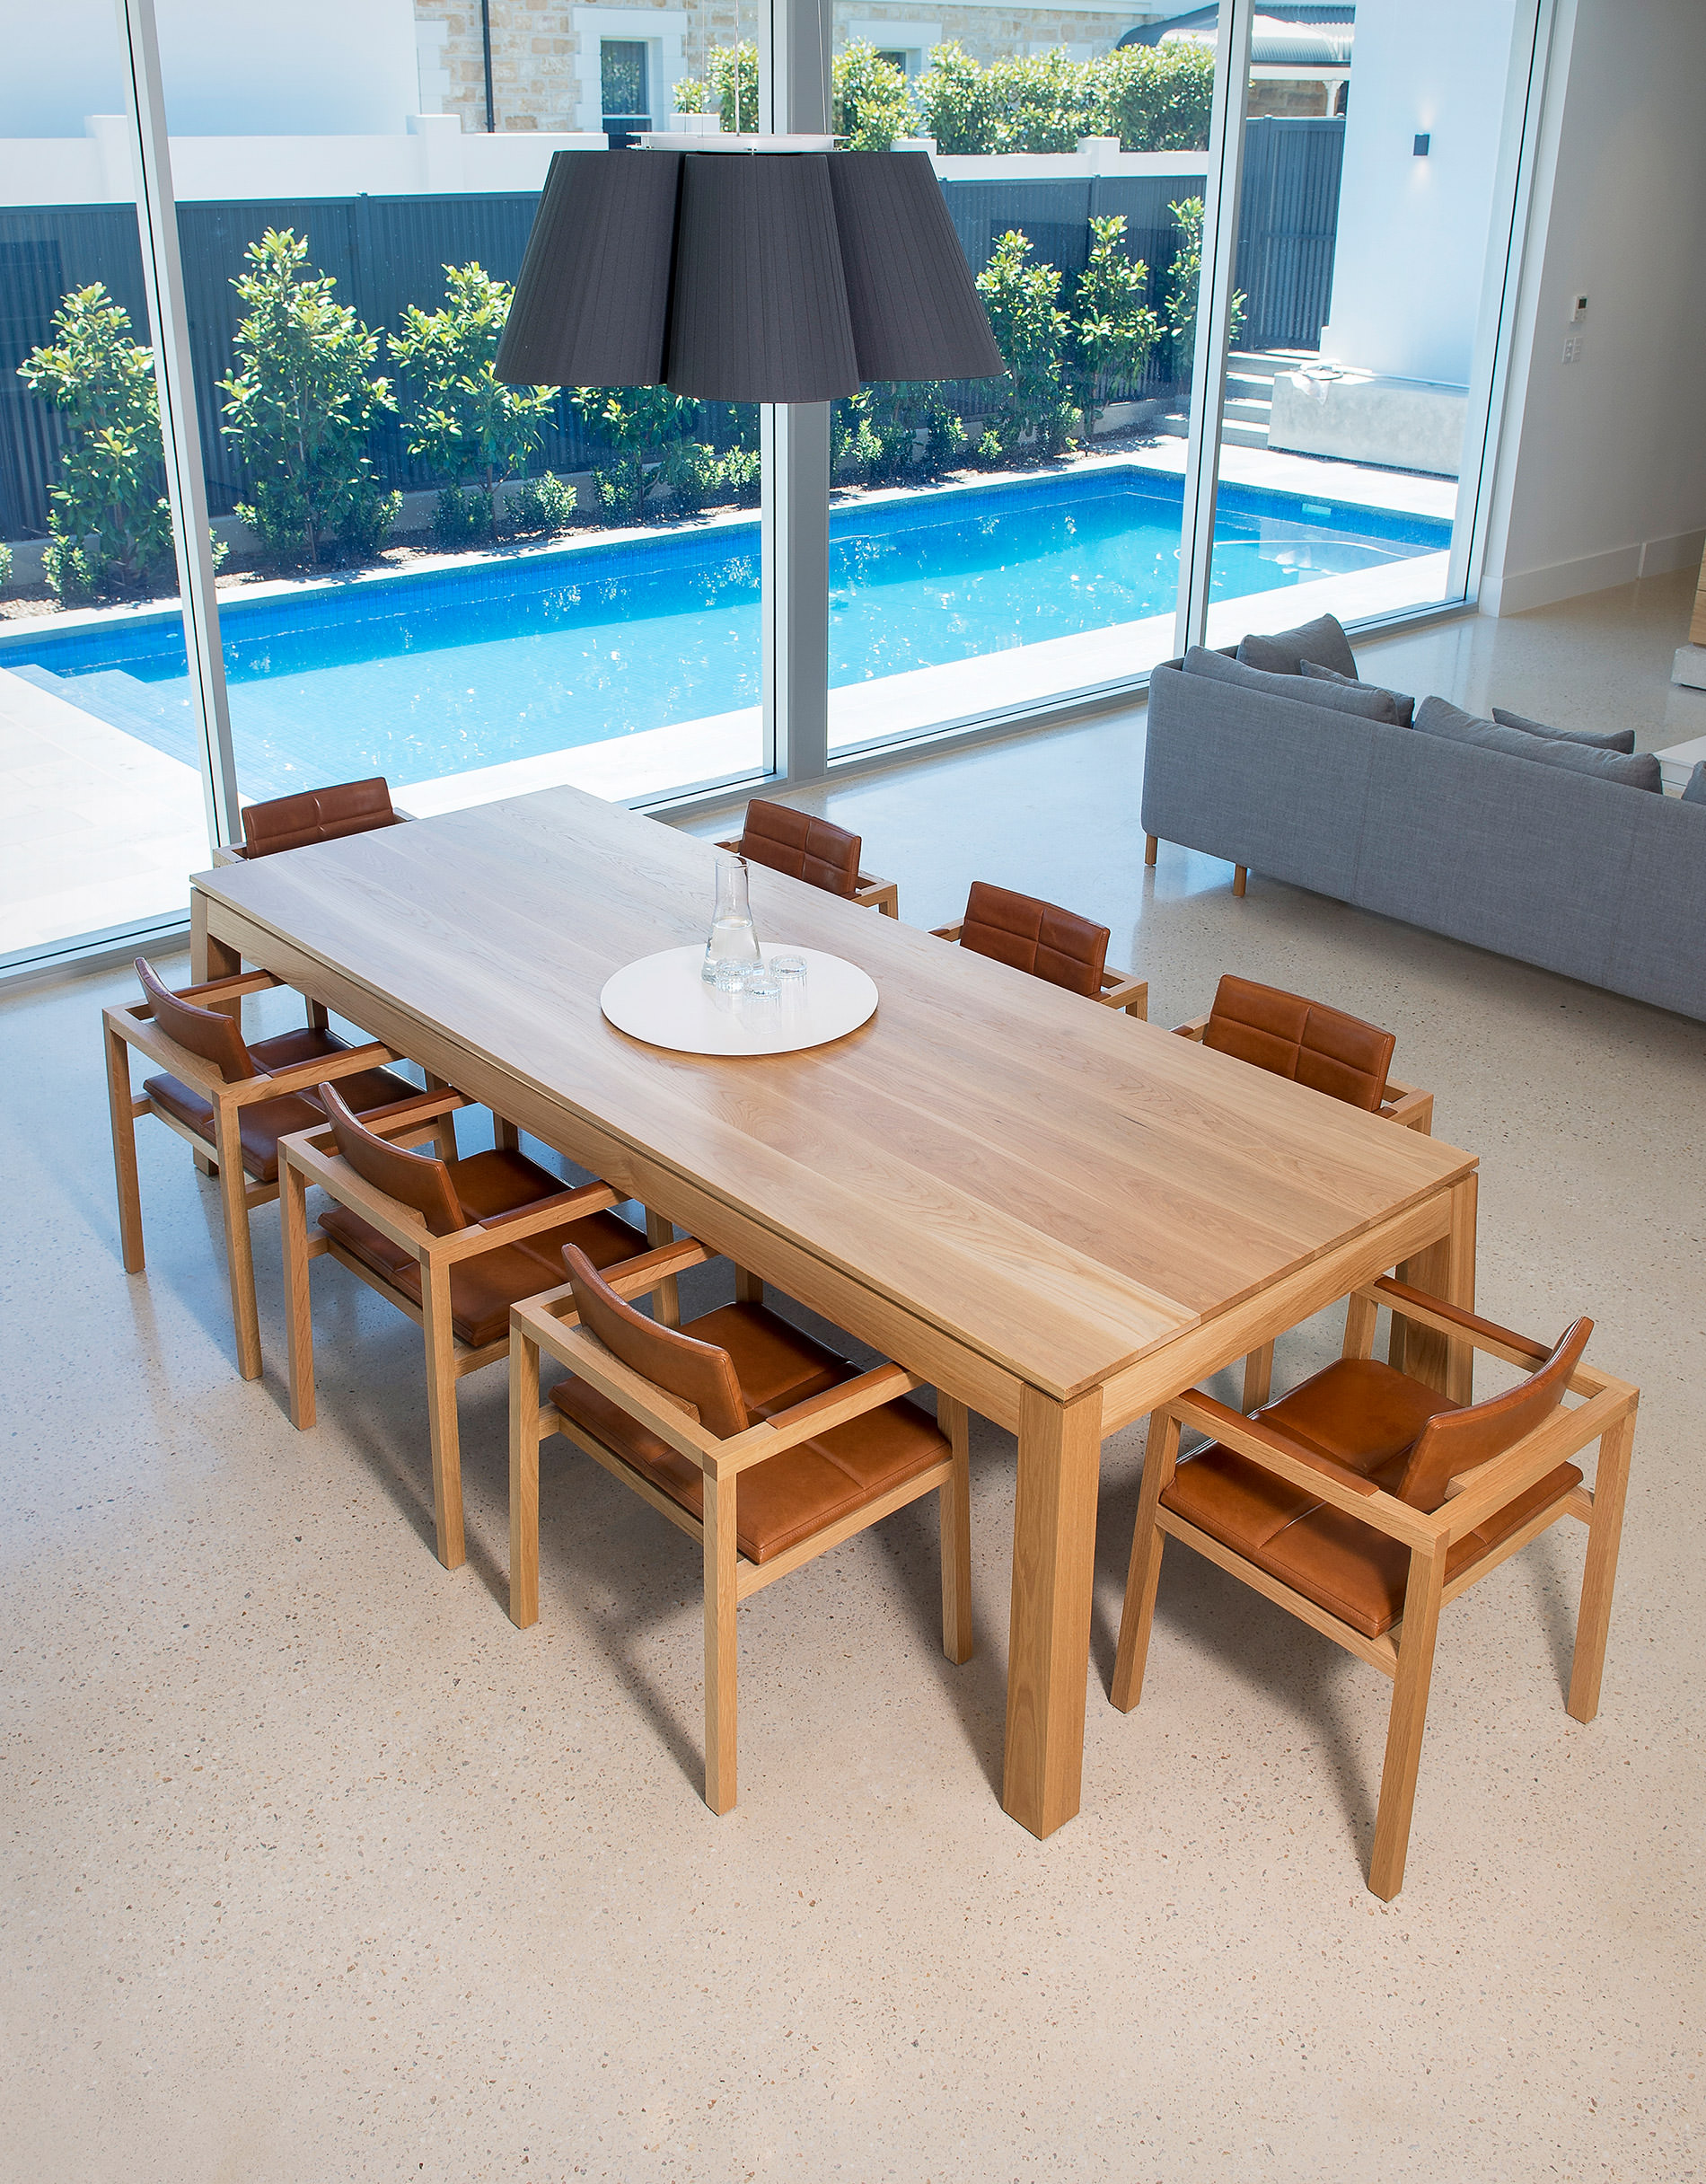 Such an airy open dining room shown here with stunning solid oak designer dining table and chairs featured with a glimmer of spectacular blue in the family pool behind